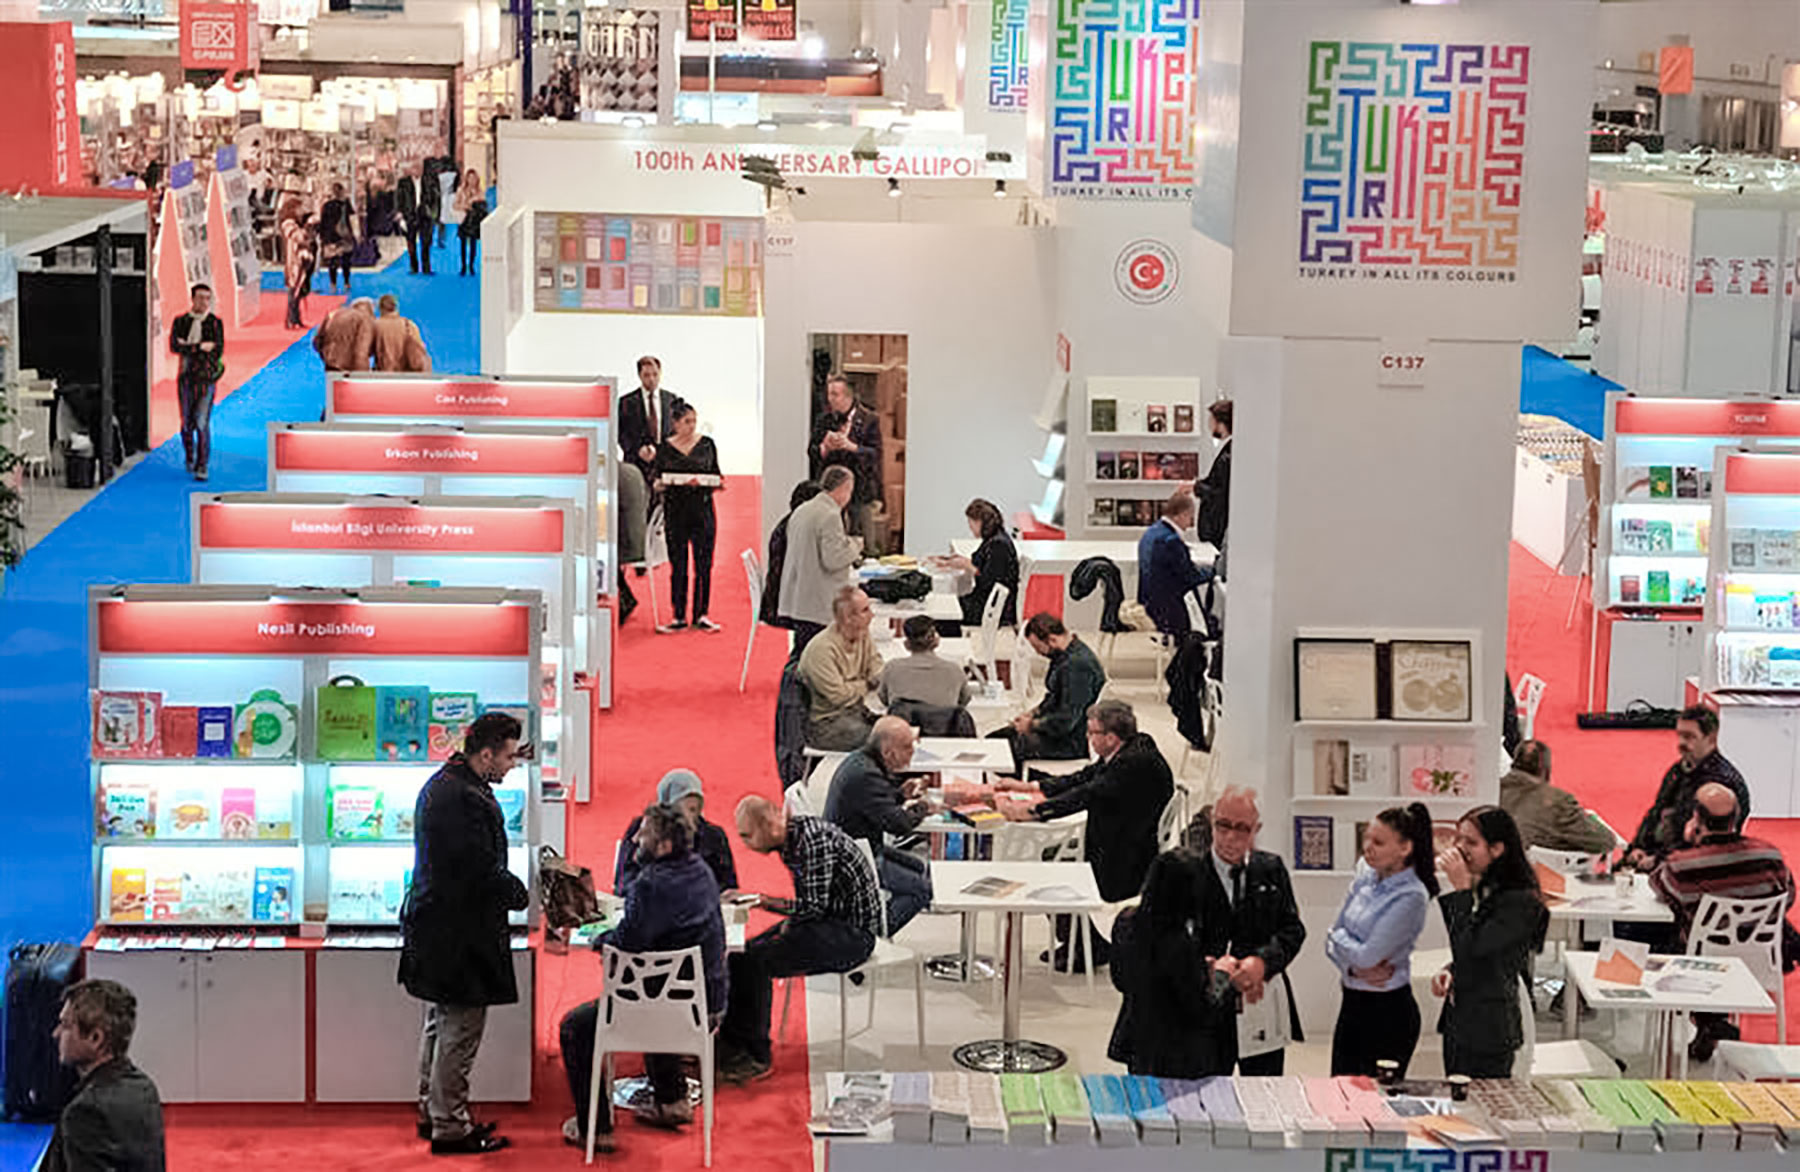 Photo of an exhibition hall at the Frankfurt Book Fair. Shows exhibition stands and small tables with people having meetings